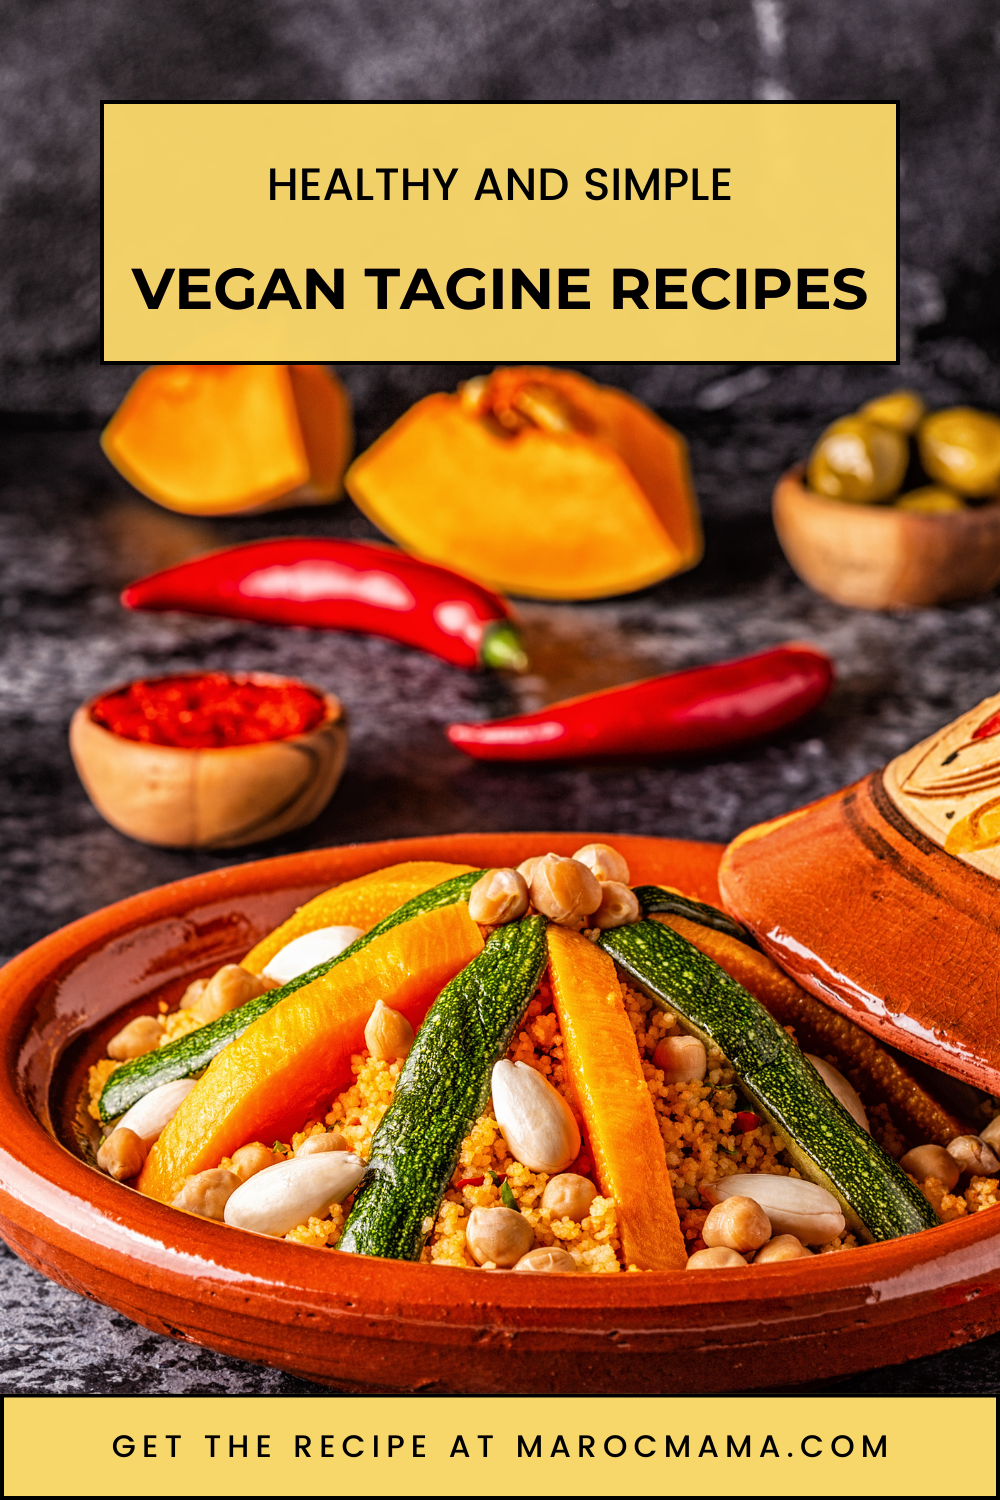 Vegan tagine consist of plant-based foods with the text Vegan Tagine Recipes